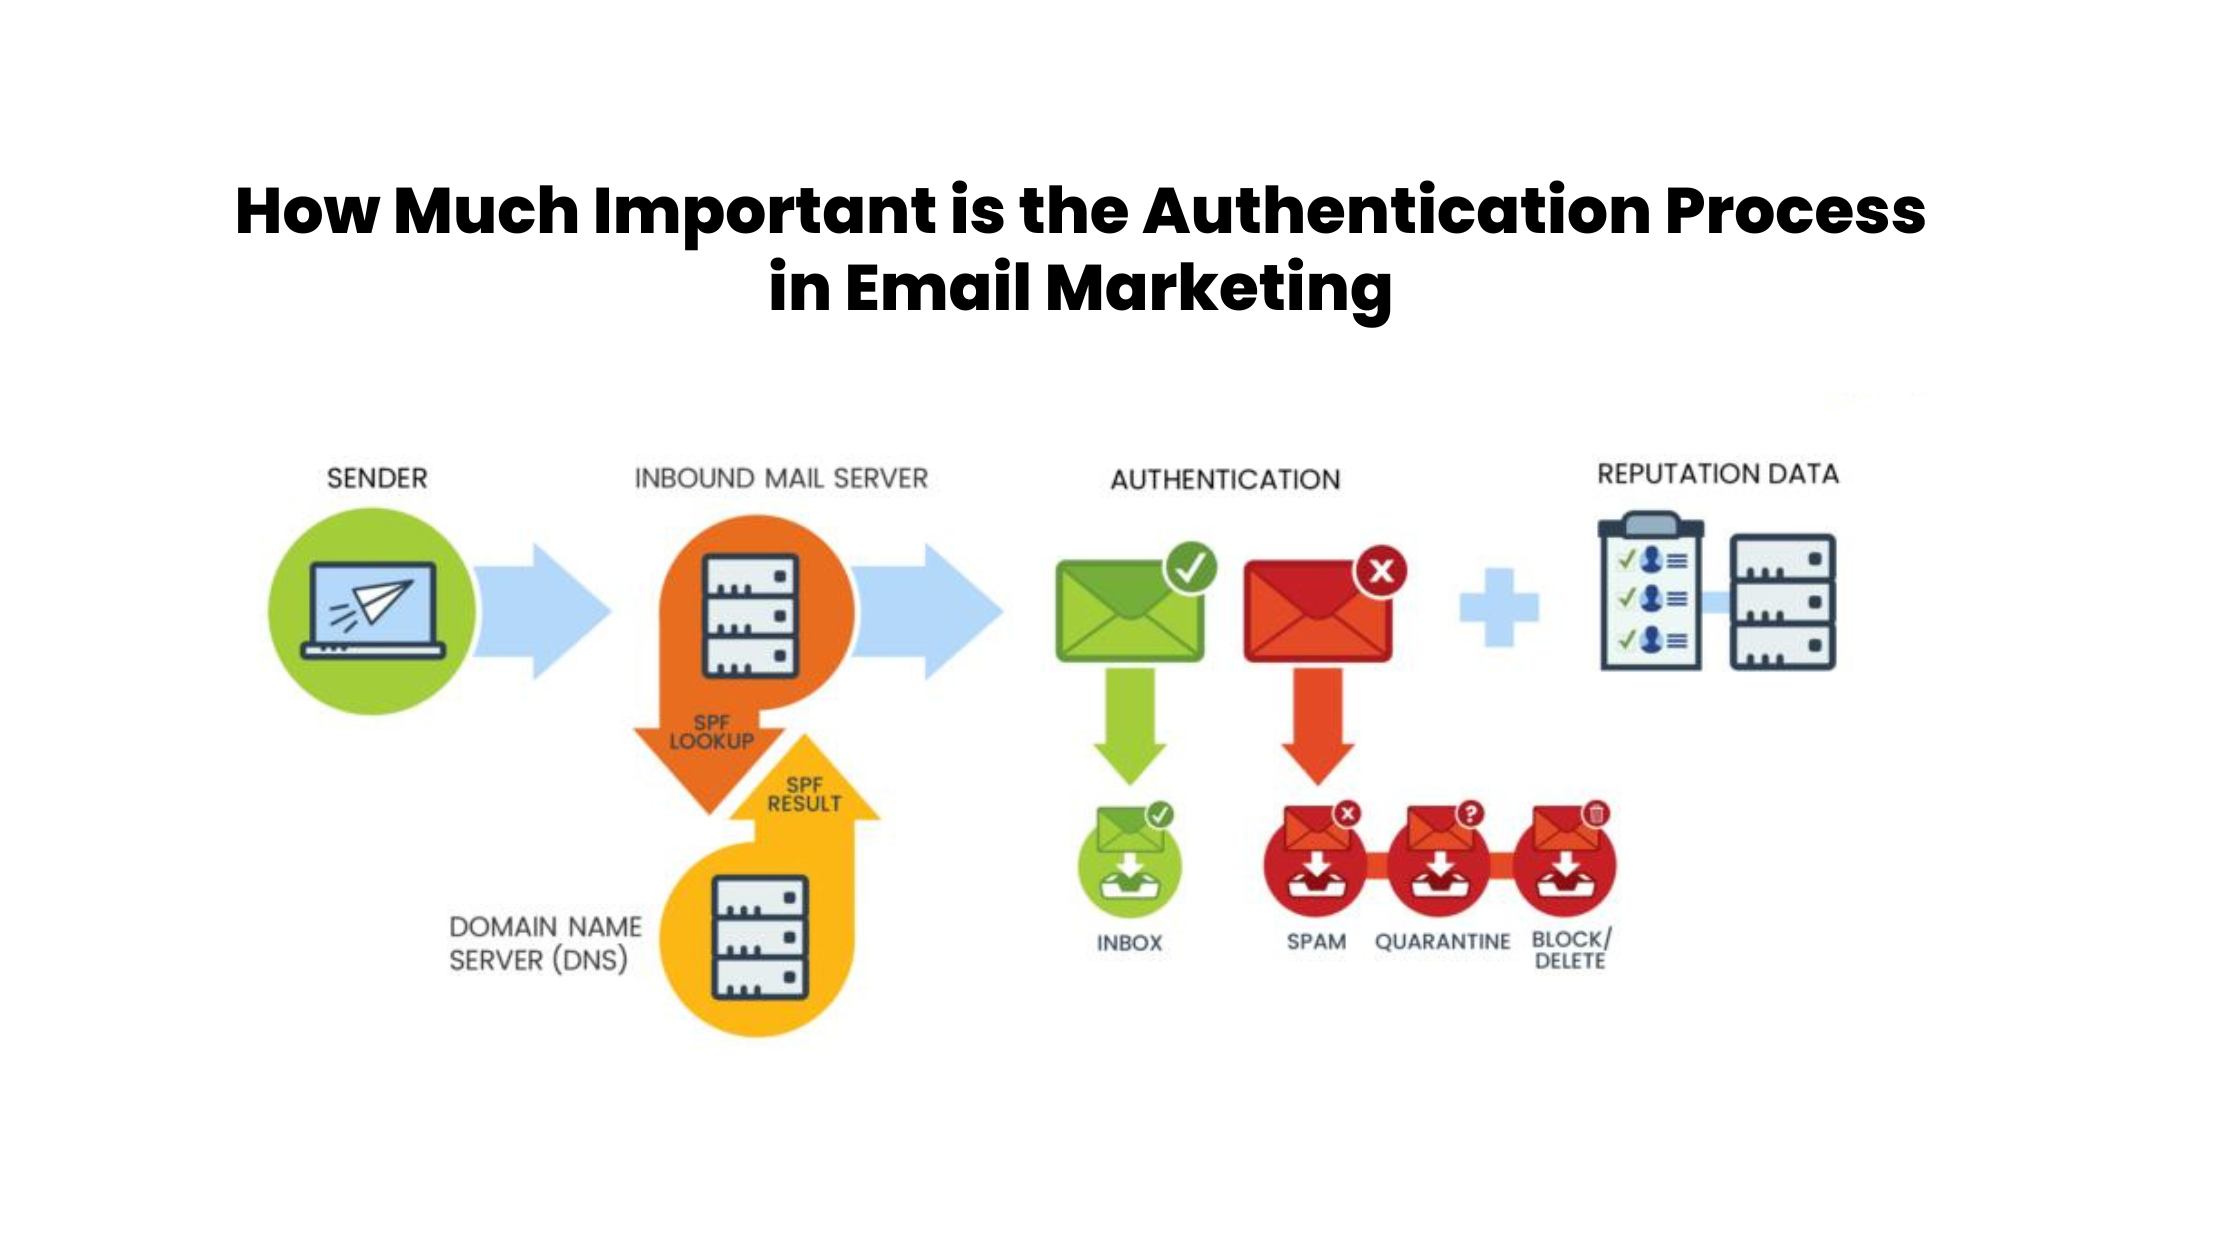 How Much Important is the Authentication Process in Email Marketing